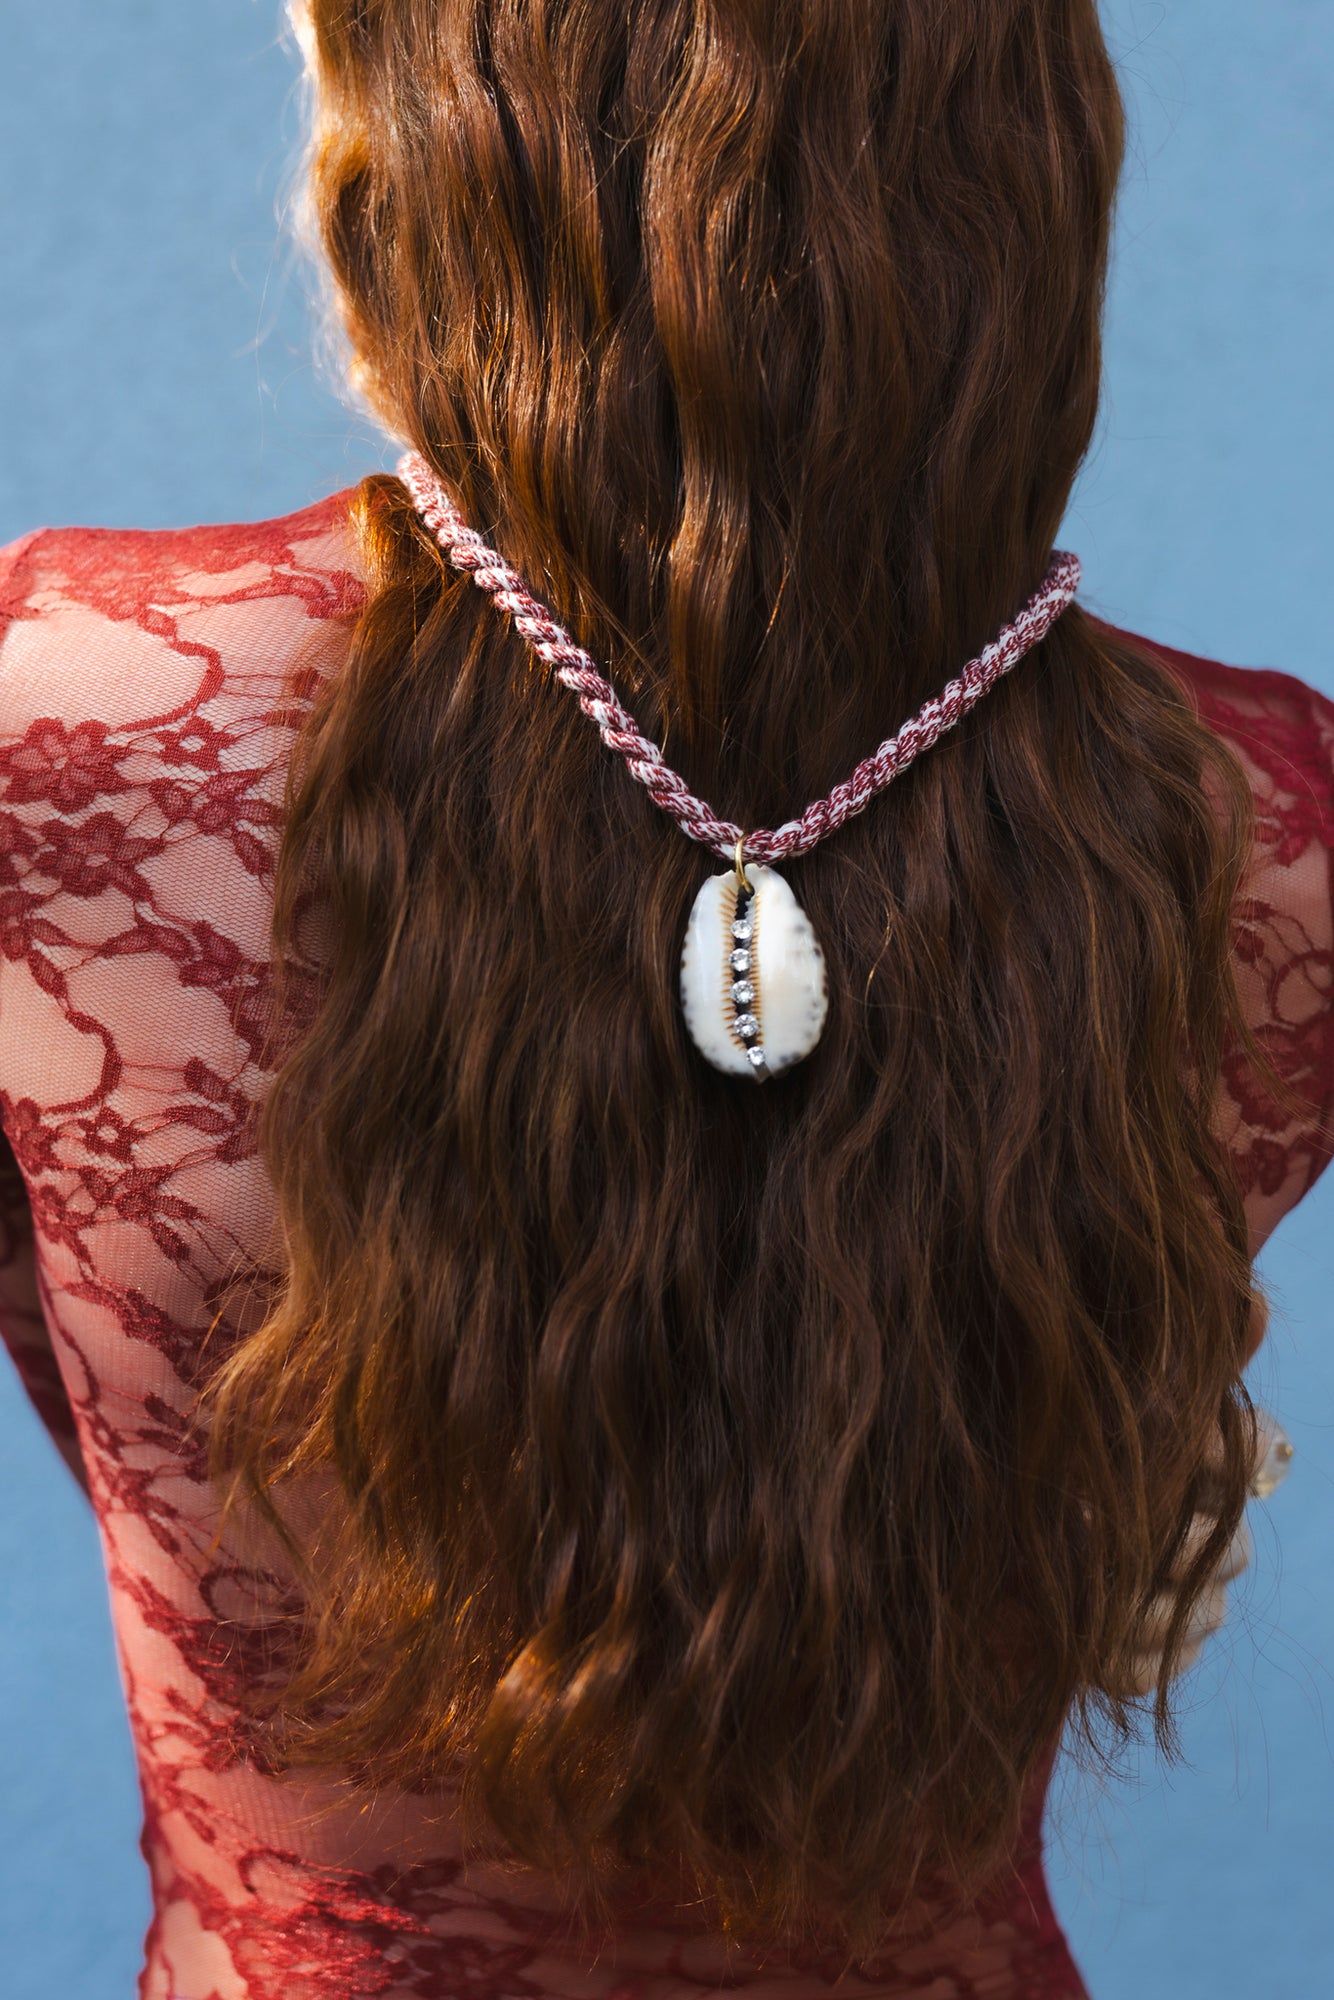 A woman with long, wavy brown hair and a red lace top faces away from the camera. She has the WALD Berlin La Piscina Bootylicious Necklace With Ribbon showcasing real shells and a Swarovski stone hanging down her back.